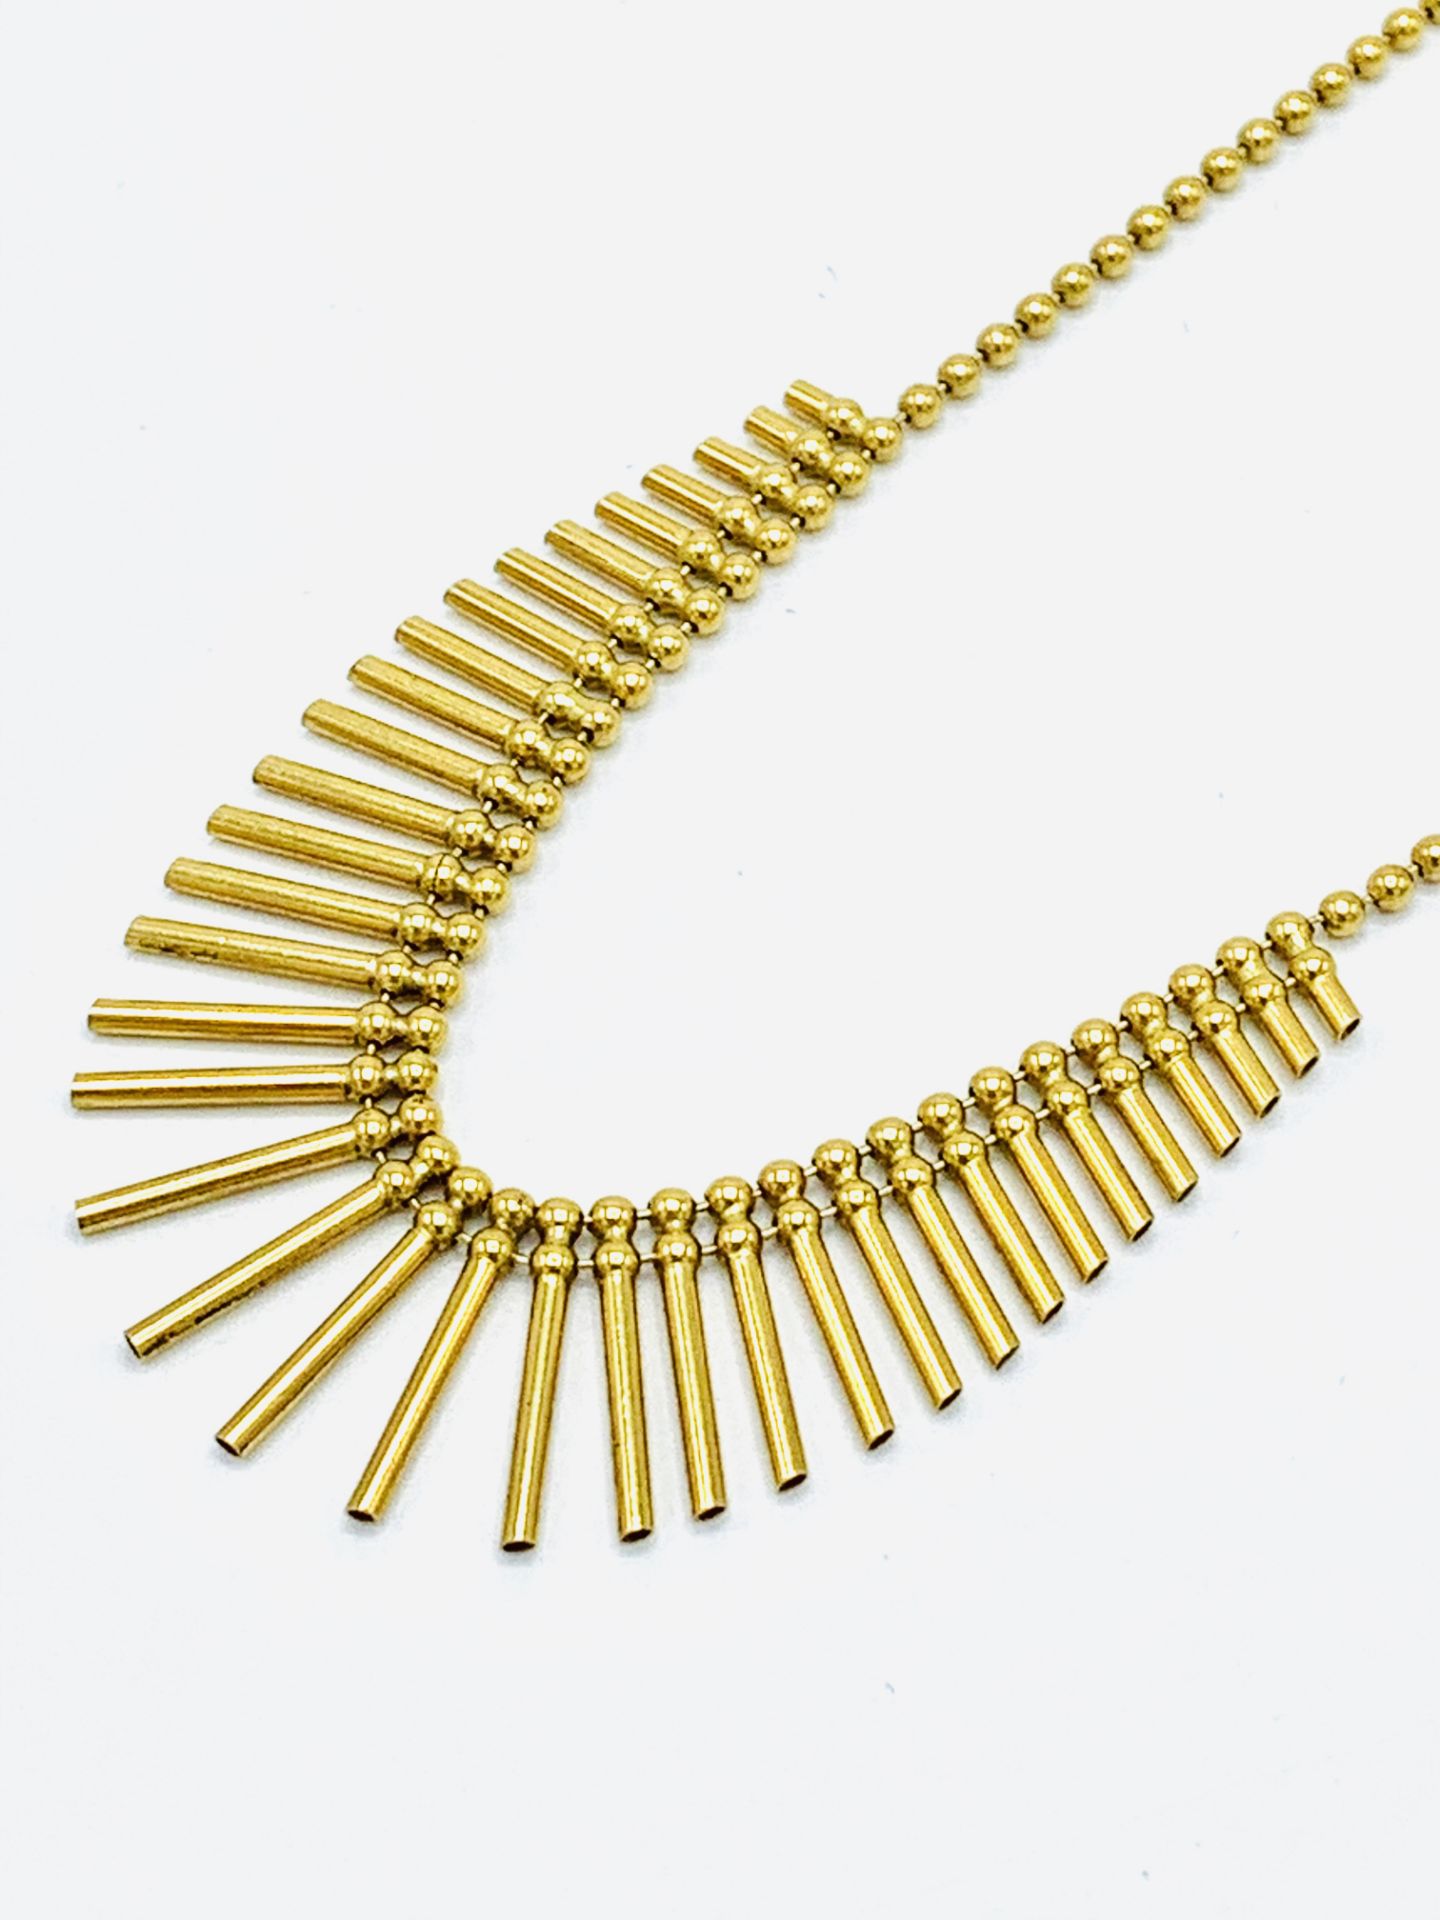 750 gold pin necklace. - Image 5 of 5